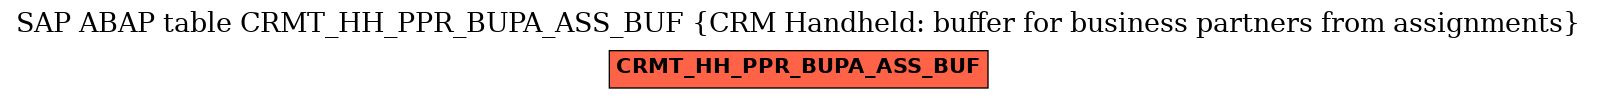 E-R Diagram for table CRMT_HH_PPR_BUPA_ASS_BUF (CRM Handheld: buffer for business partners from assignments)